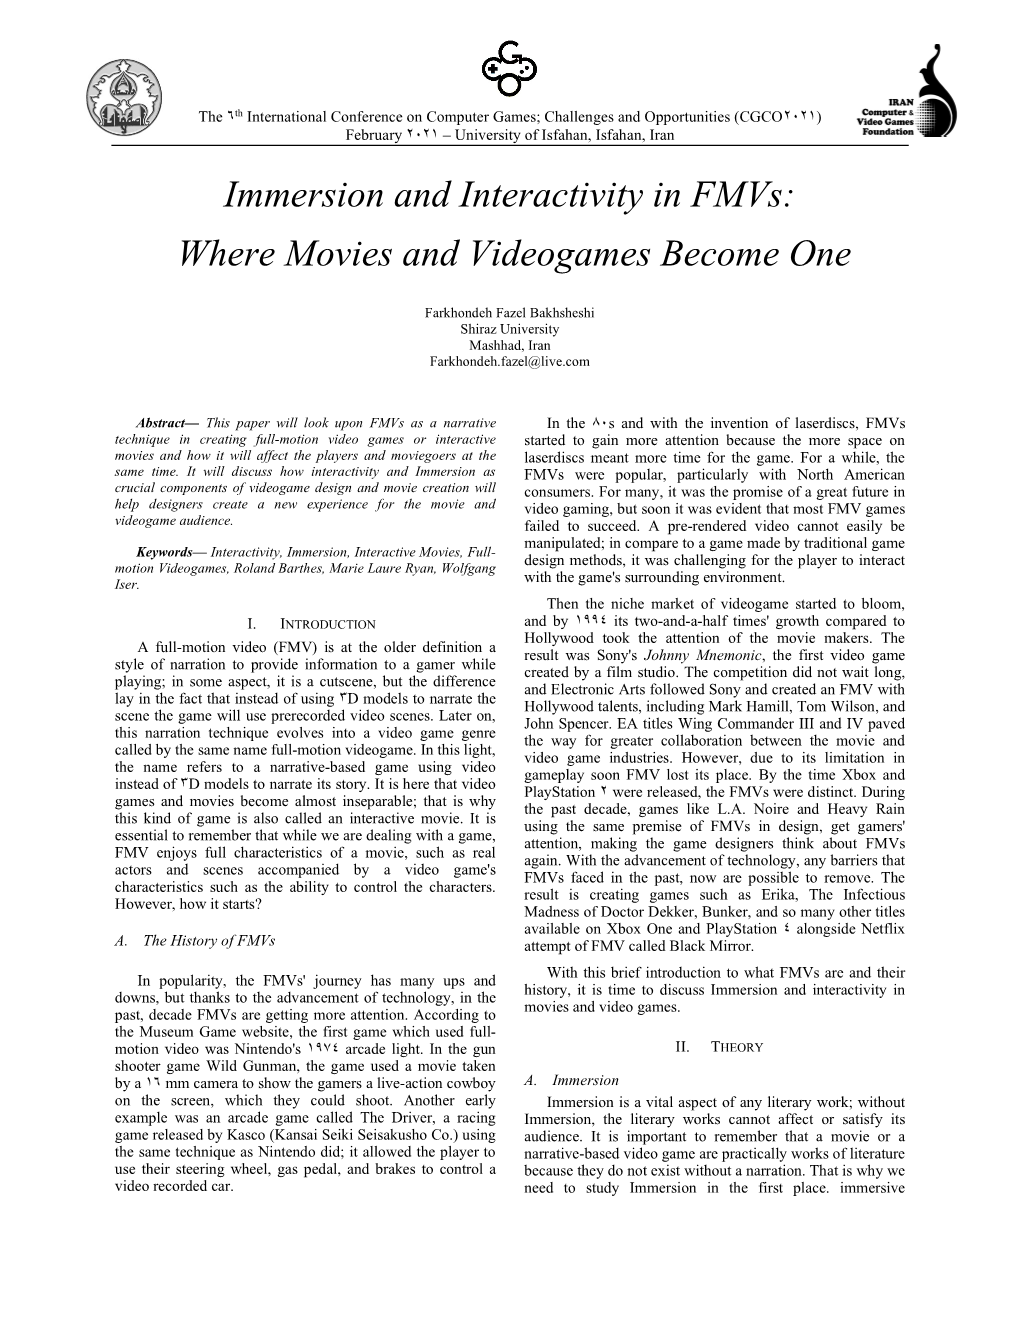 Immersion and Interactivity in Fmvs: Where Movies and Videogames Become One